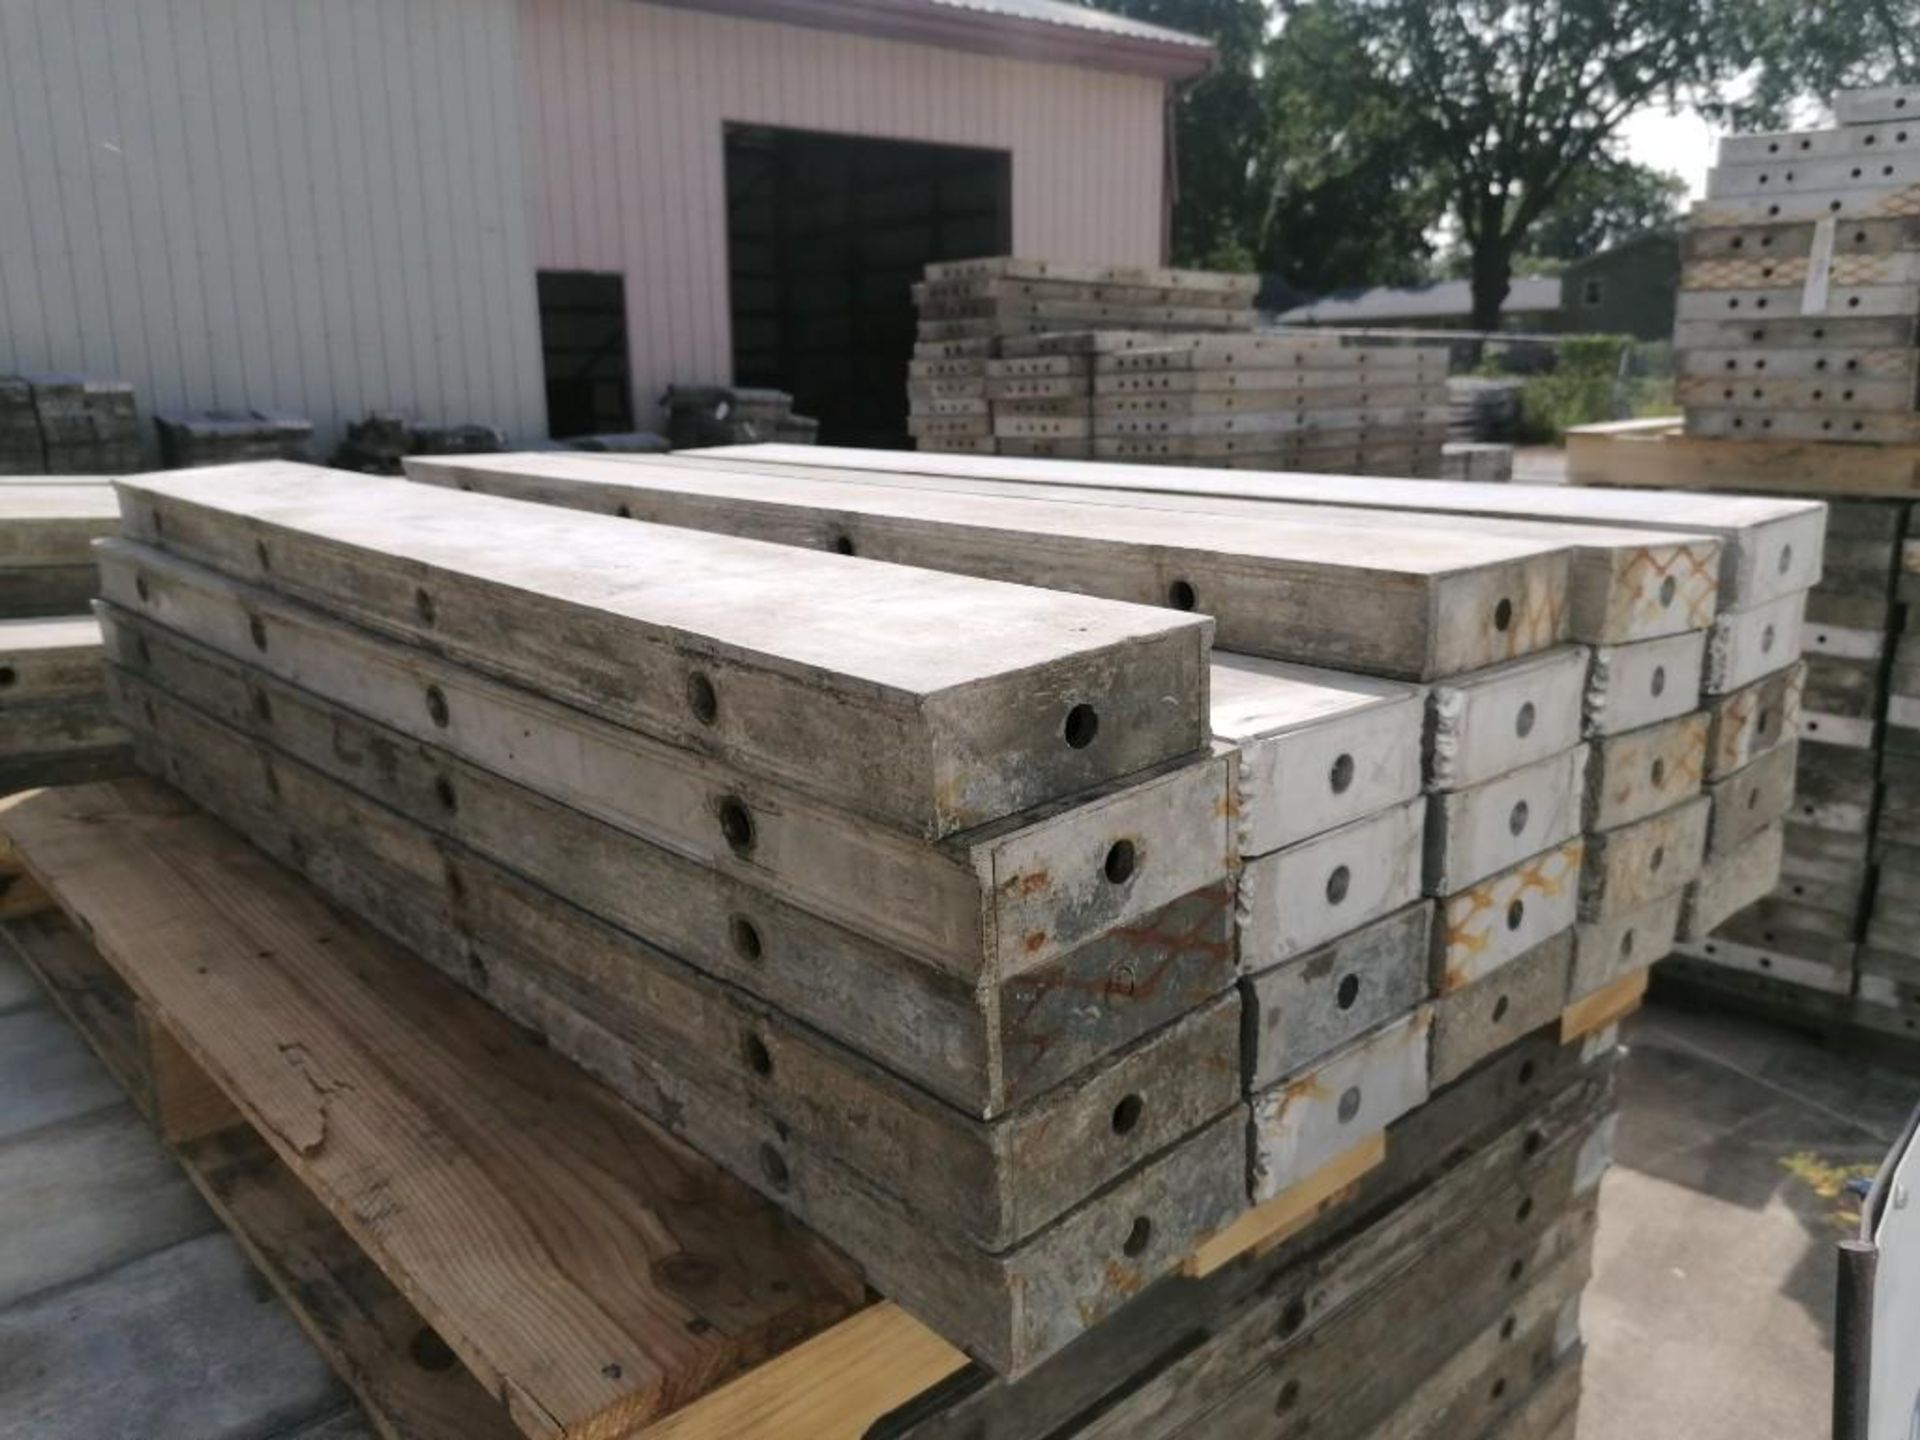 (24) 6" x 4' Wall-Ties Aluminum Concrete Forms, Smooth 6-12 Hole Pattern. Located at 301 E Henry